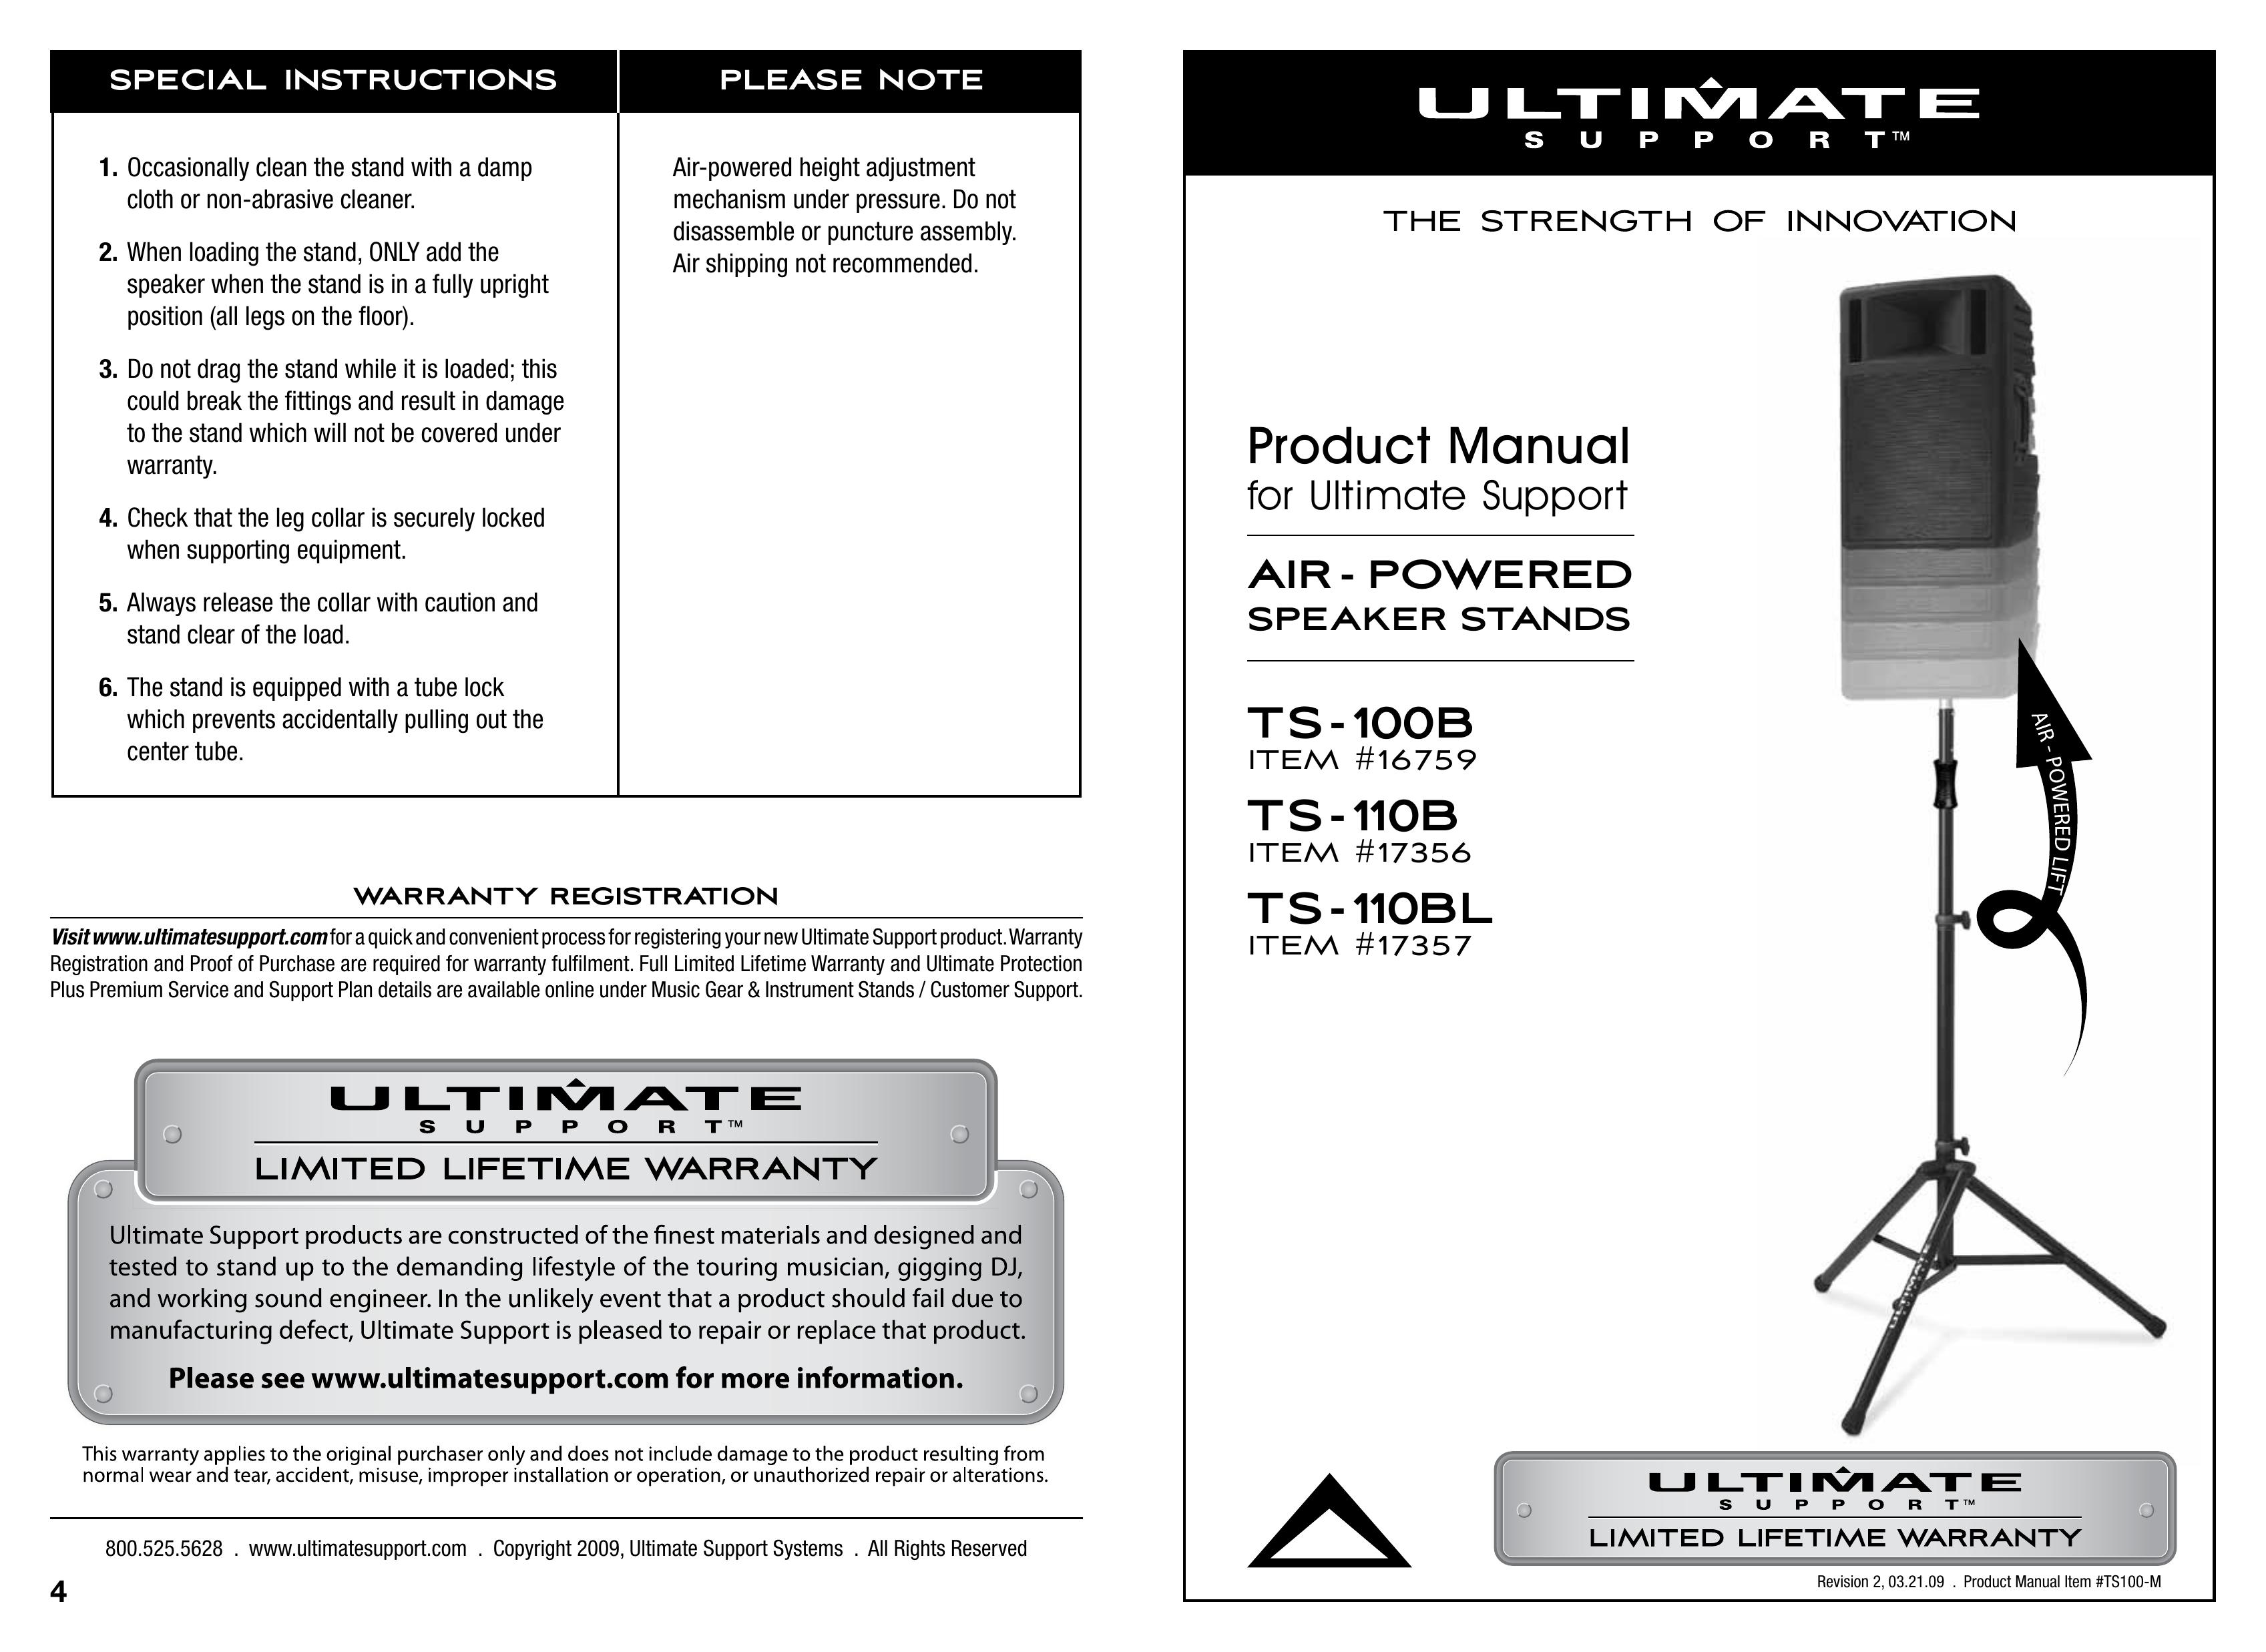 Ultimate Support Systems TS-100B Water Dispenser User Manual